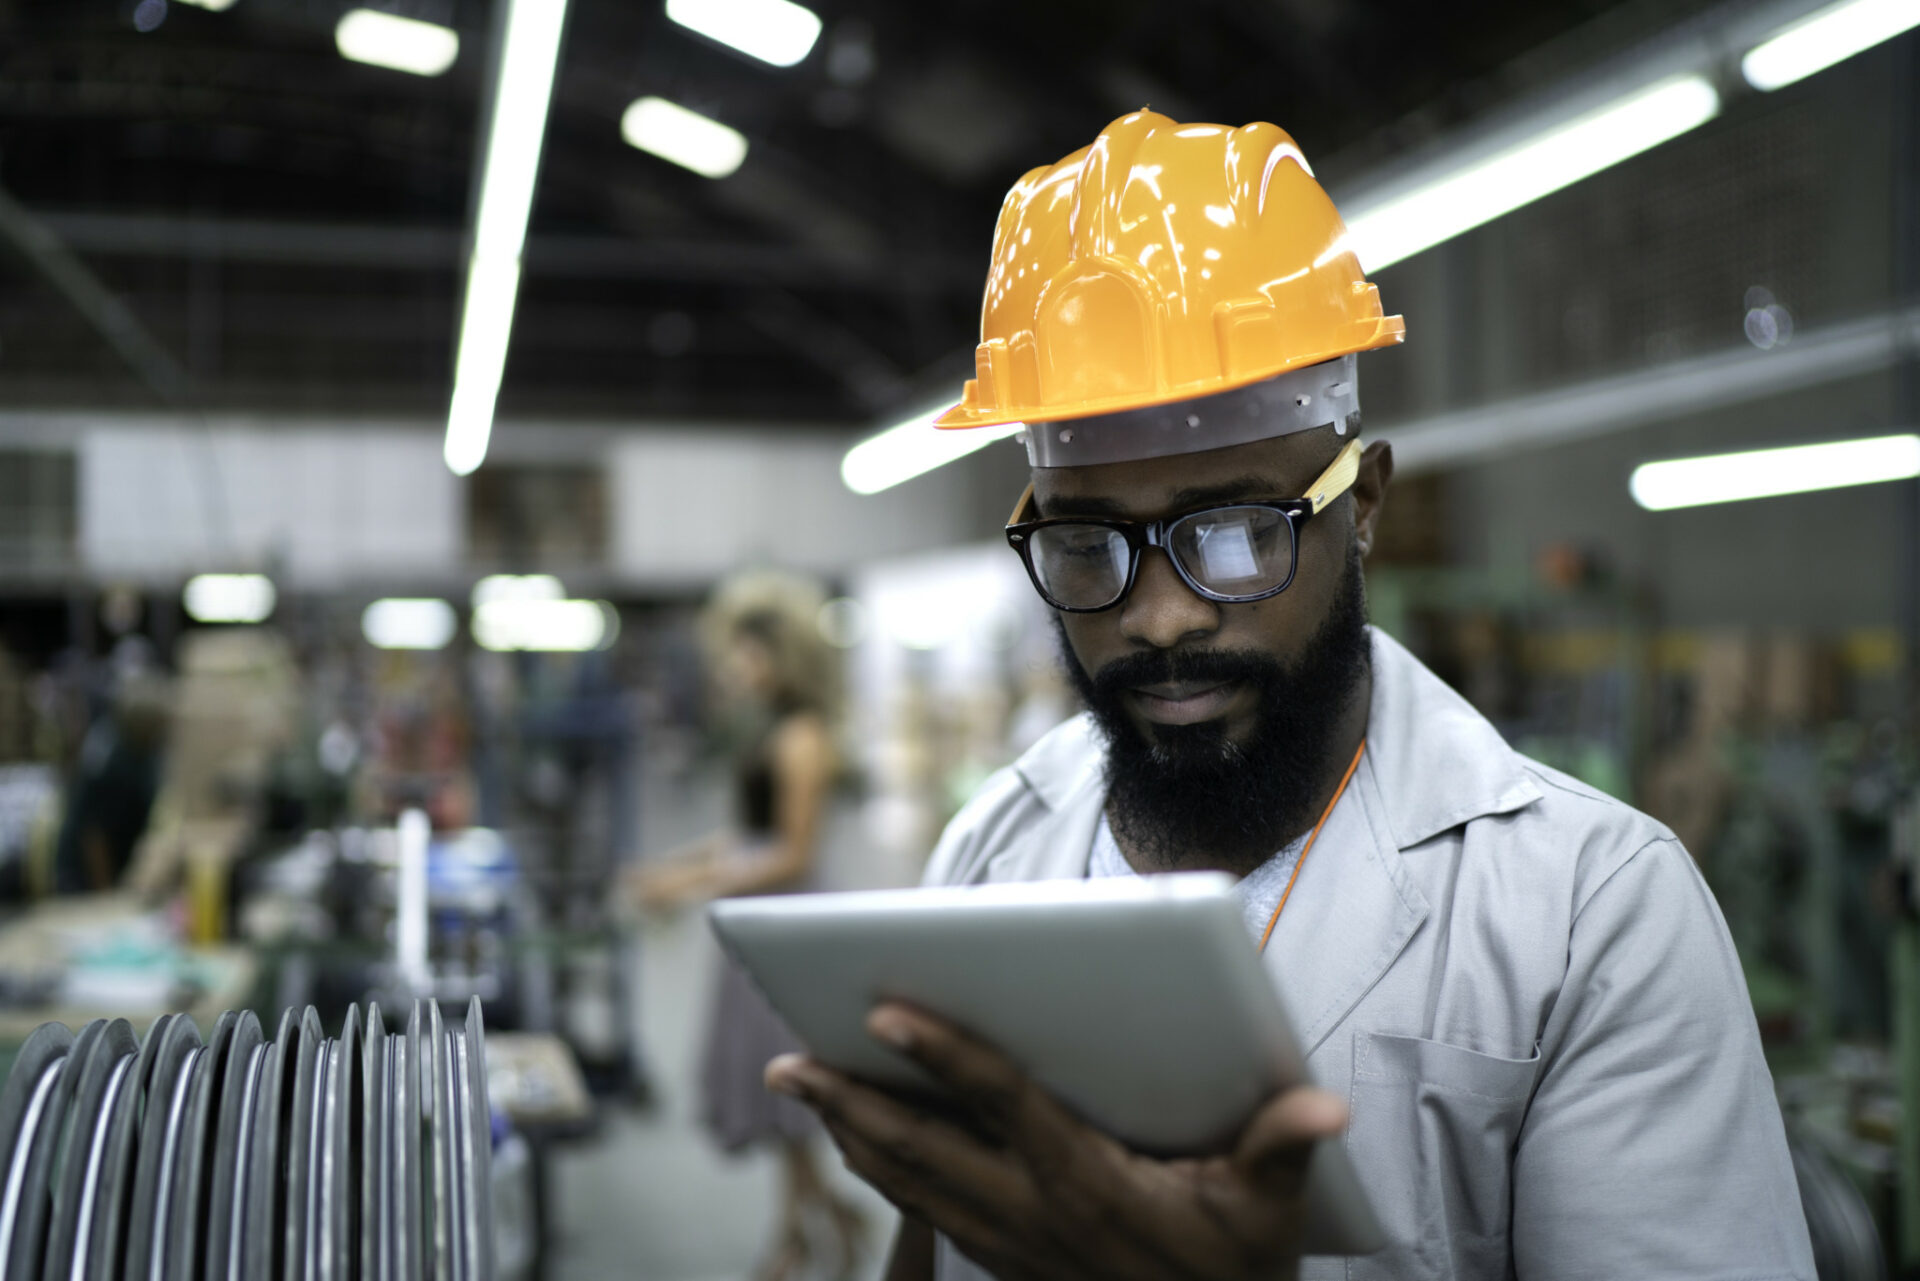 A man wearing a hardhat reviews information on a tablet while in a factory.